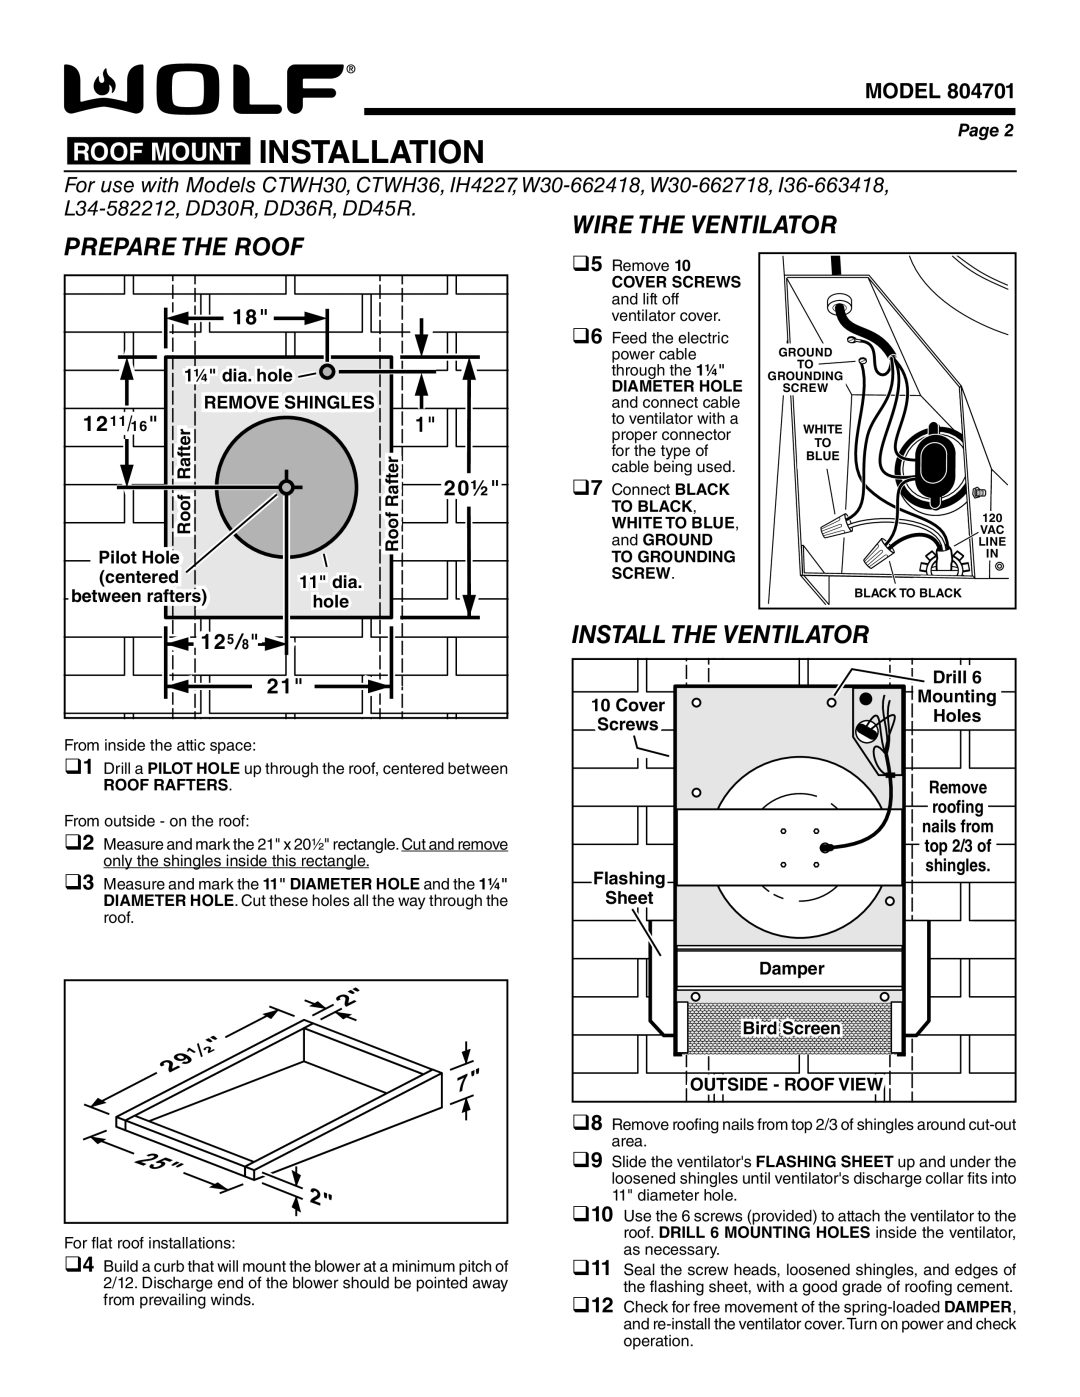 Wolf Appliance Company 801640 Roof Mount Installation, For use with Models CTWH30, CTWH36, IH4227, W30-662418, W30-662718 